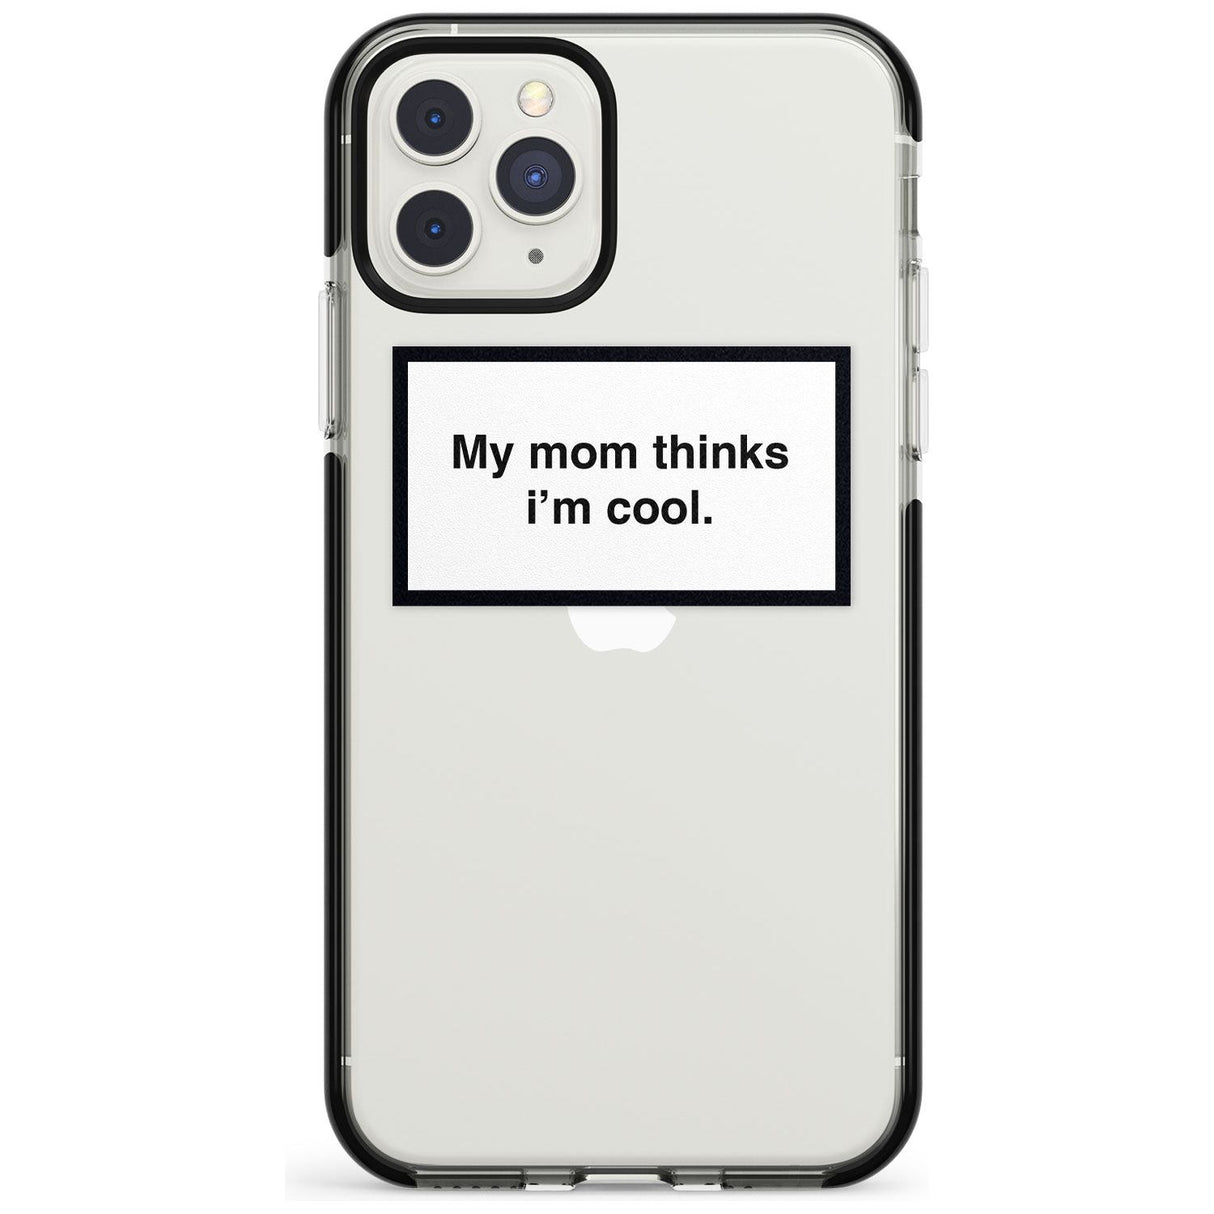 My Mom Thinks i'm Cool Phone Case iPhone 11 Pro Max / Black Impact Case,iPhone 11 Pro / Black Impact Case,iPhone 12 Pro Max / Black Impact Case Blanc Space